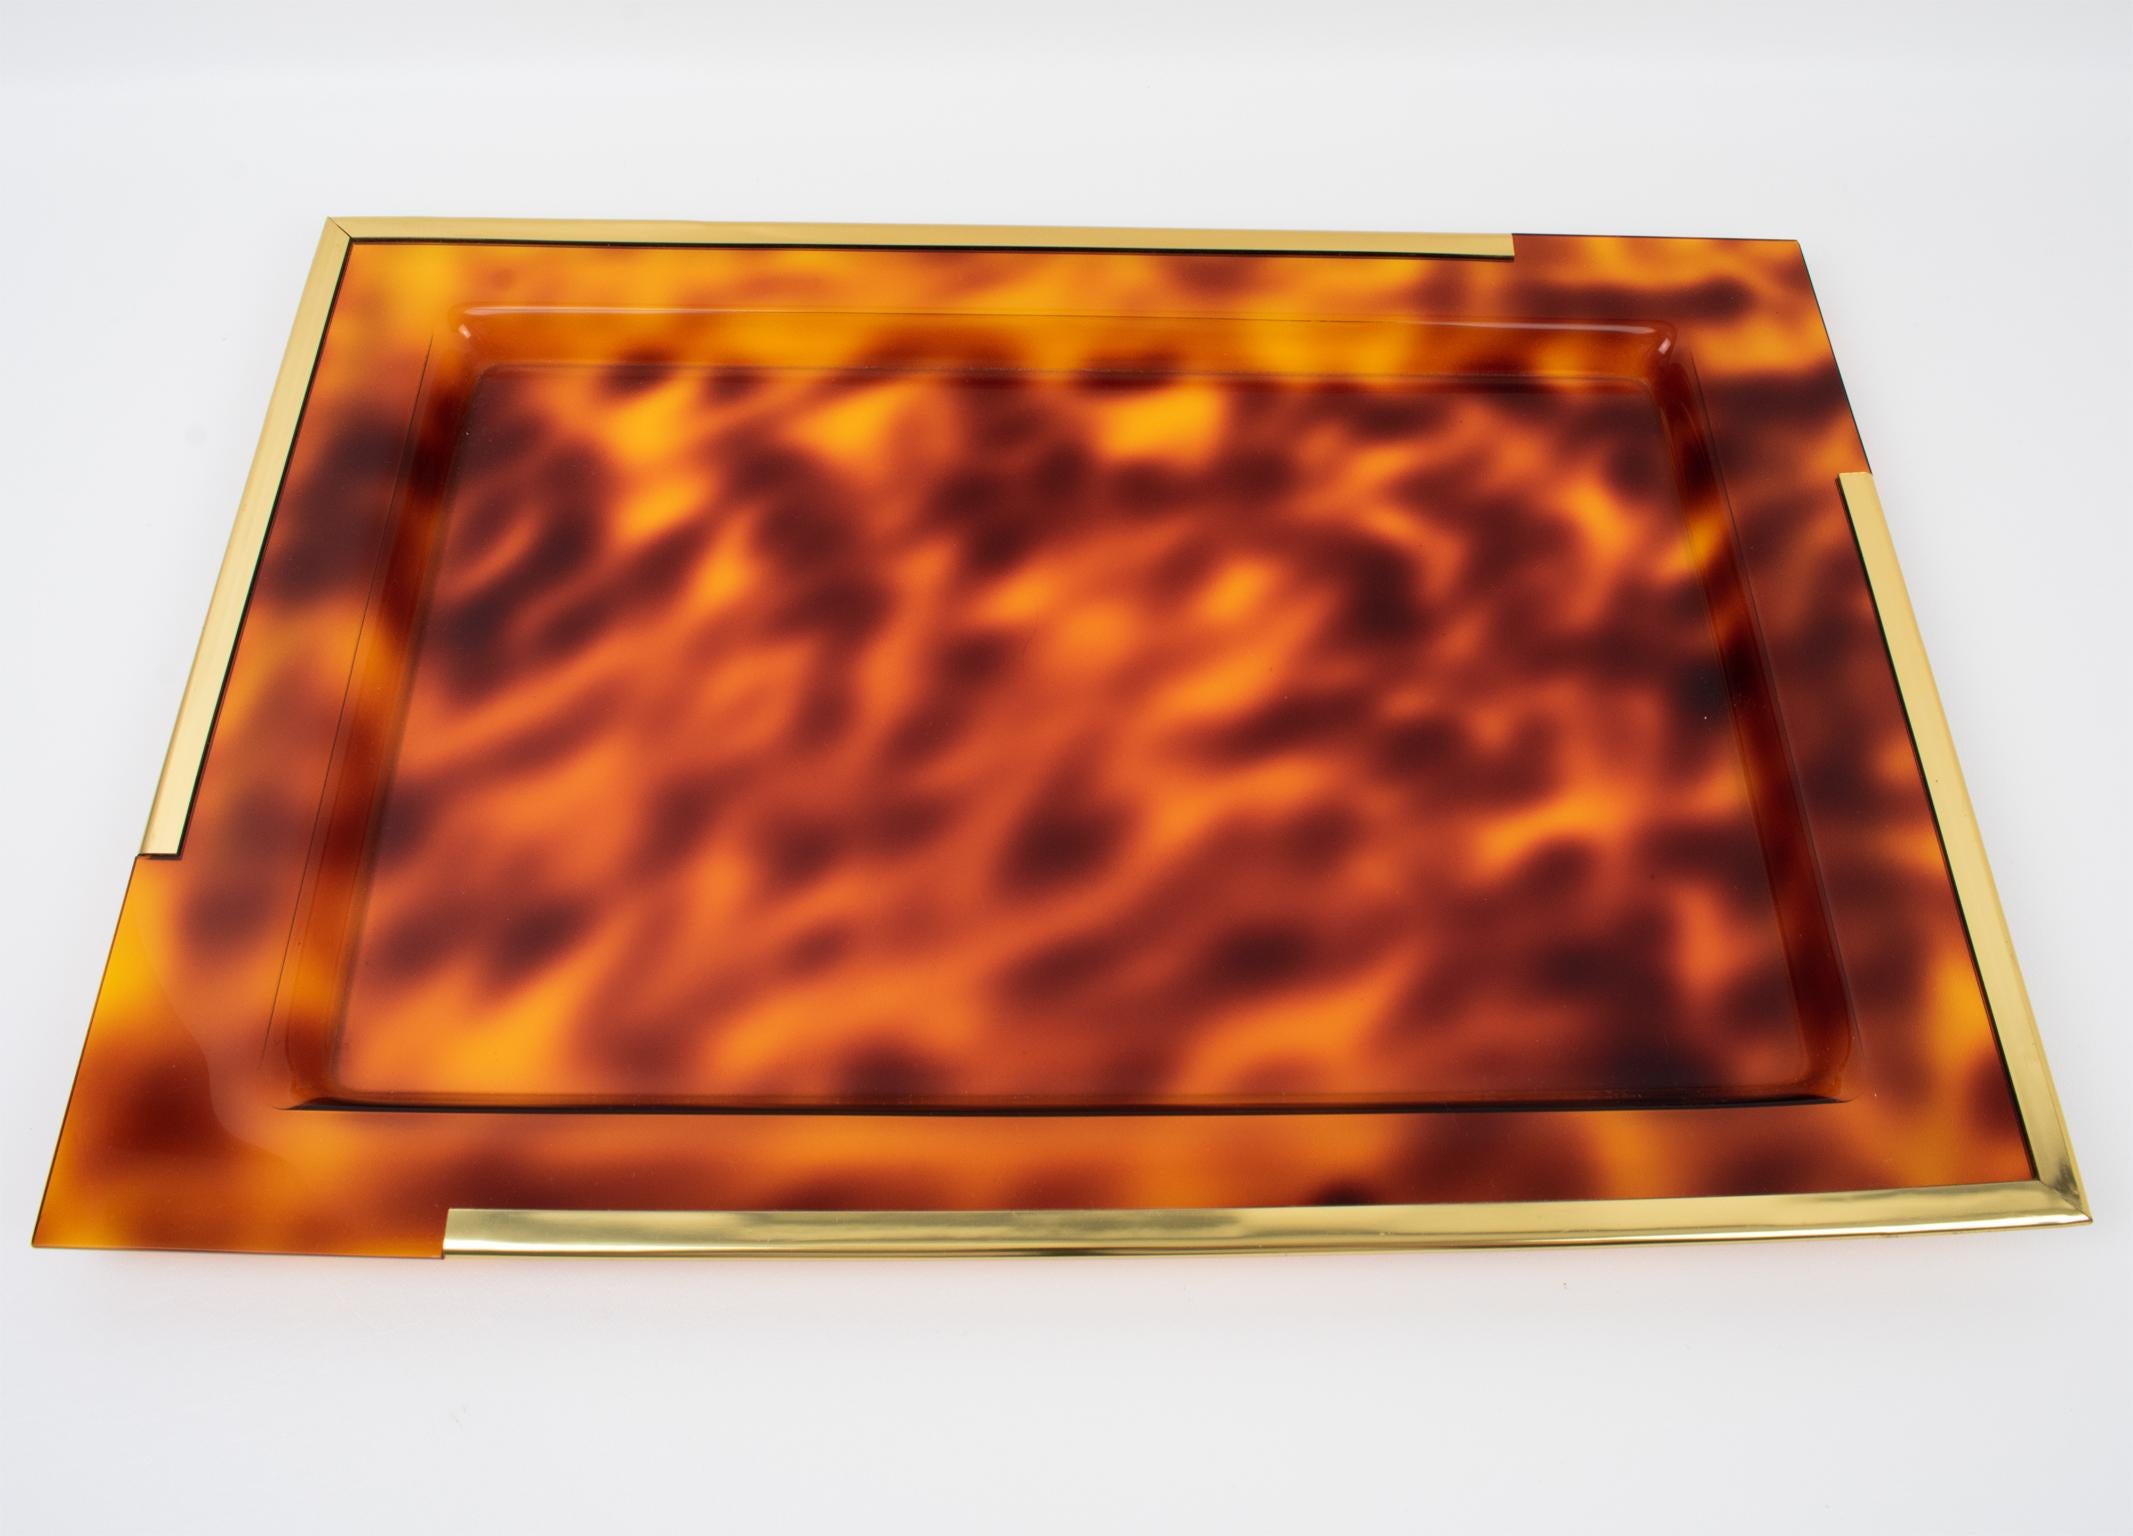 Barware Serving Tray Tortoiseshell Lucite and Brass, Italy 1970s In Excellent Condition For Sale In Atlanta, GA